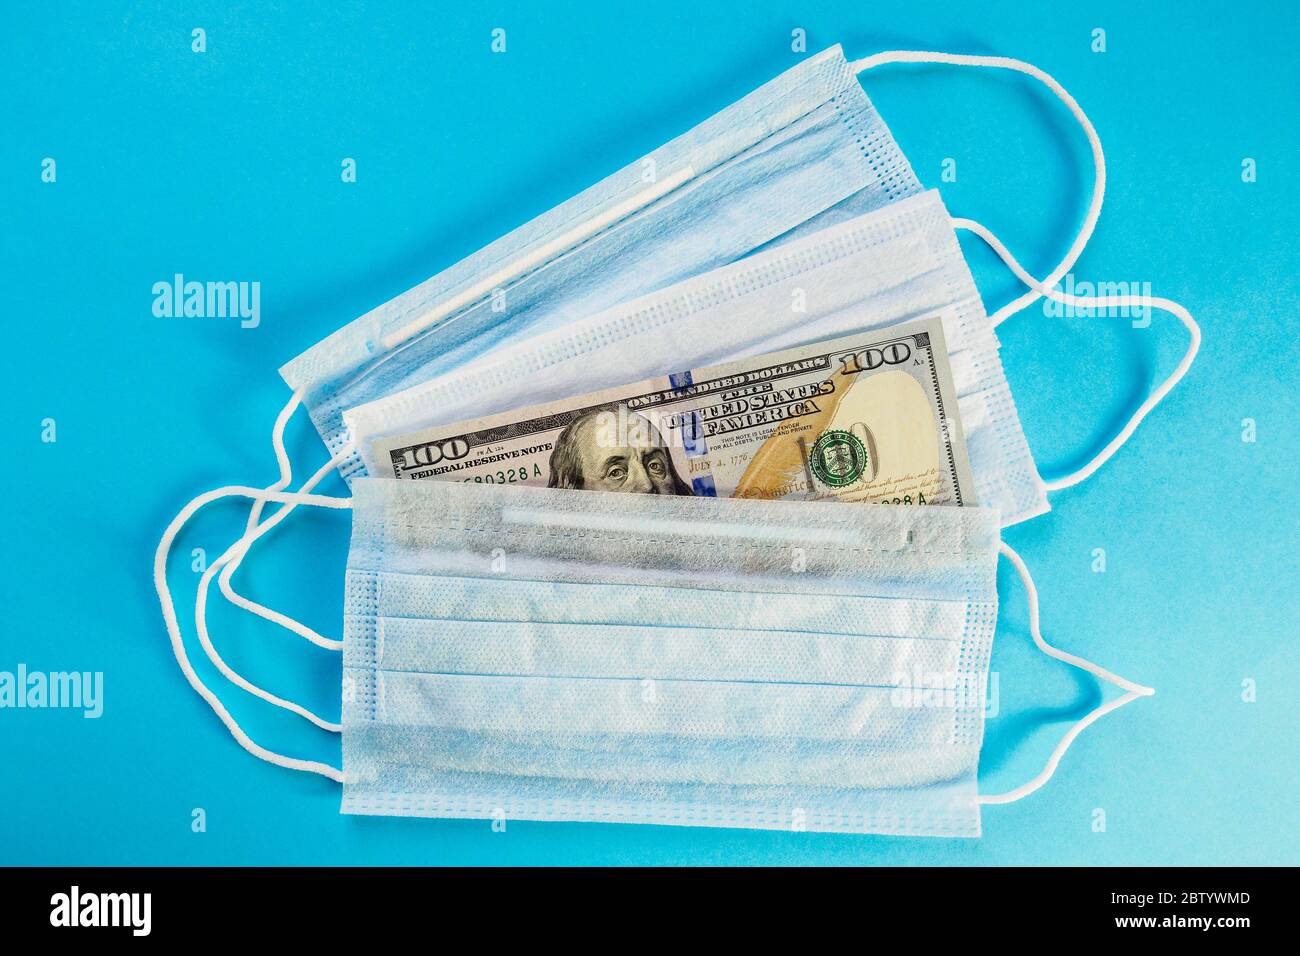 Face masks and banknote of 100 dollars on blue background. Concept of deficit, speculation and sold out of medical masks. Top view Stock Photo